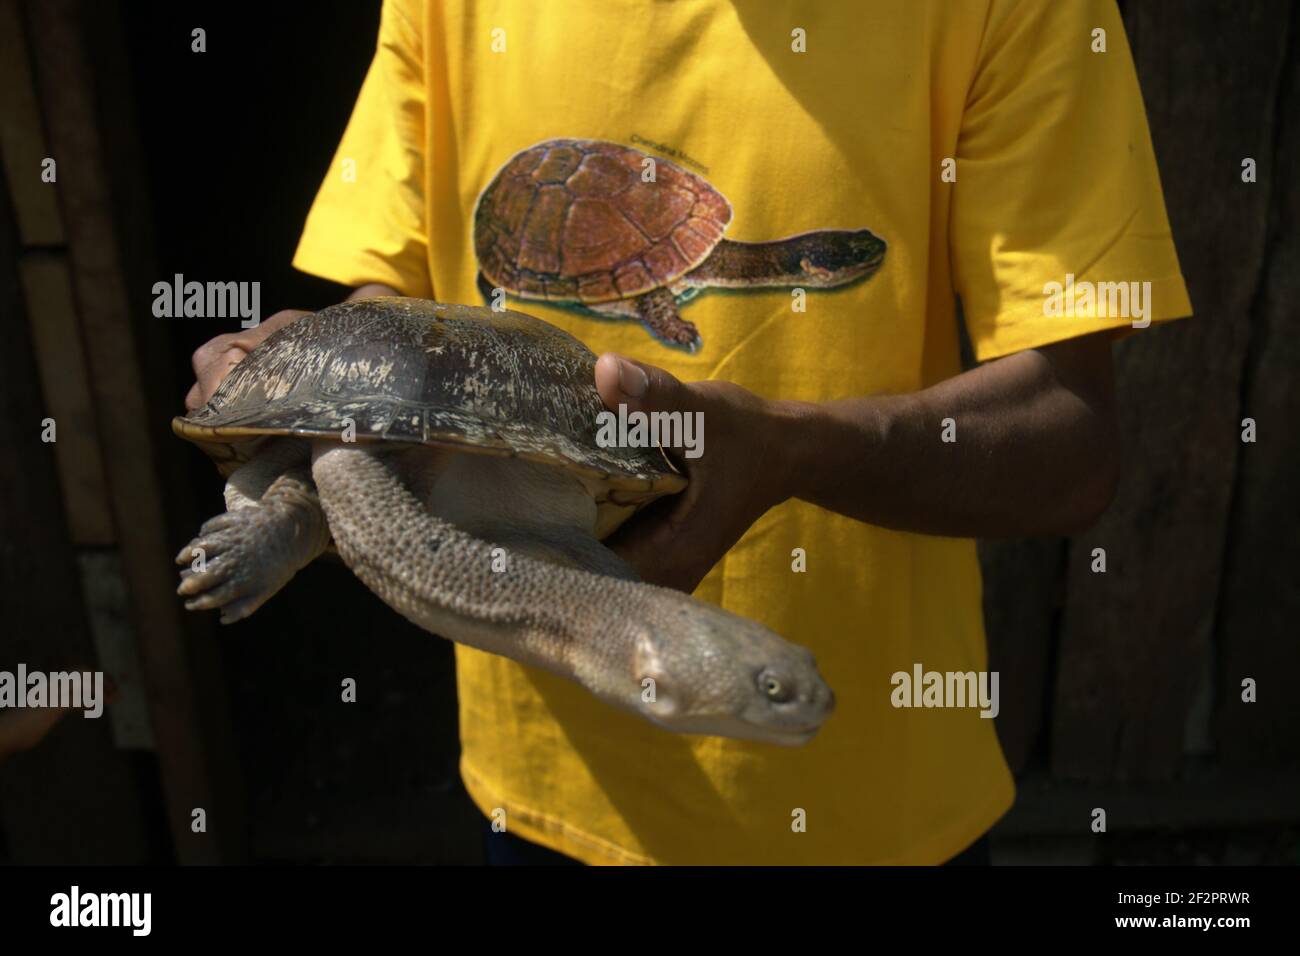 A villager showing his collection of a Rote Island's endemic snake-necked turtle (Chelodina mccordi) that he would release into the wild by his own will, after he participated in an event attended by government officials, which had released turtles bred in captivity back to a suitable habitat. Rote Island, Indonesia. Stock Photo